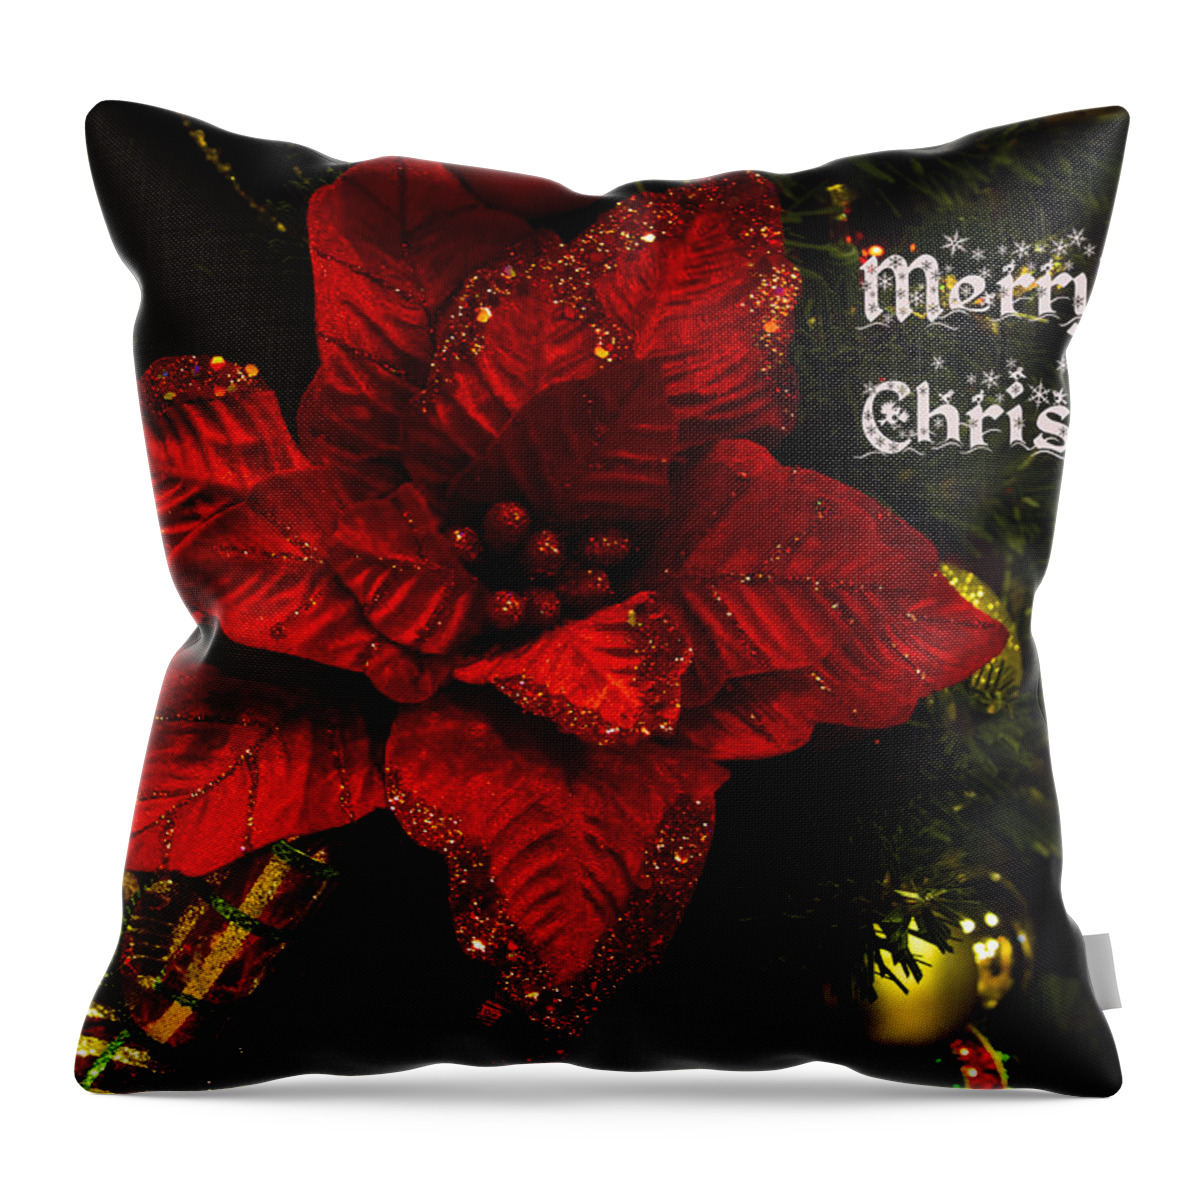 Poinsettia Throw Pillow featuring the photograph Poinsettia Christmas Greeting Card by Mark Andrew Thomas